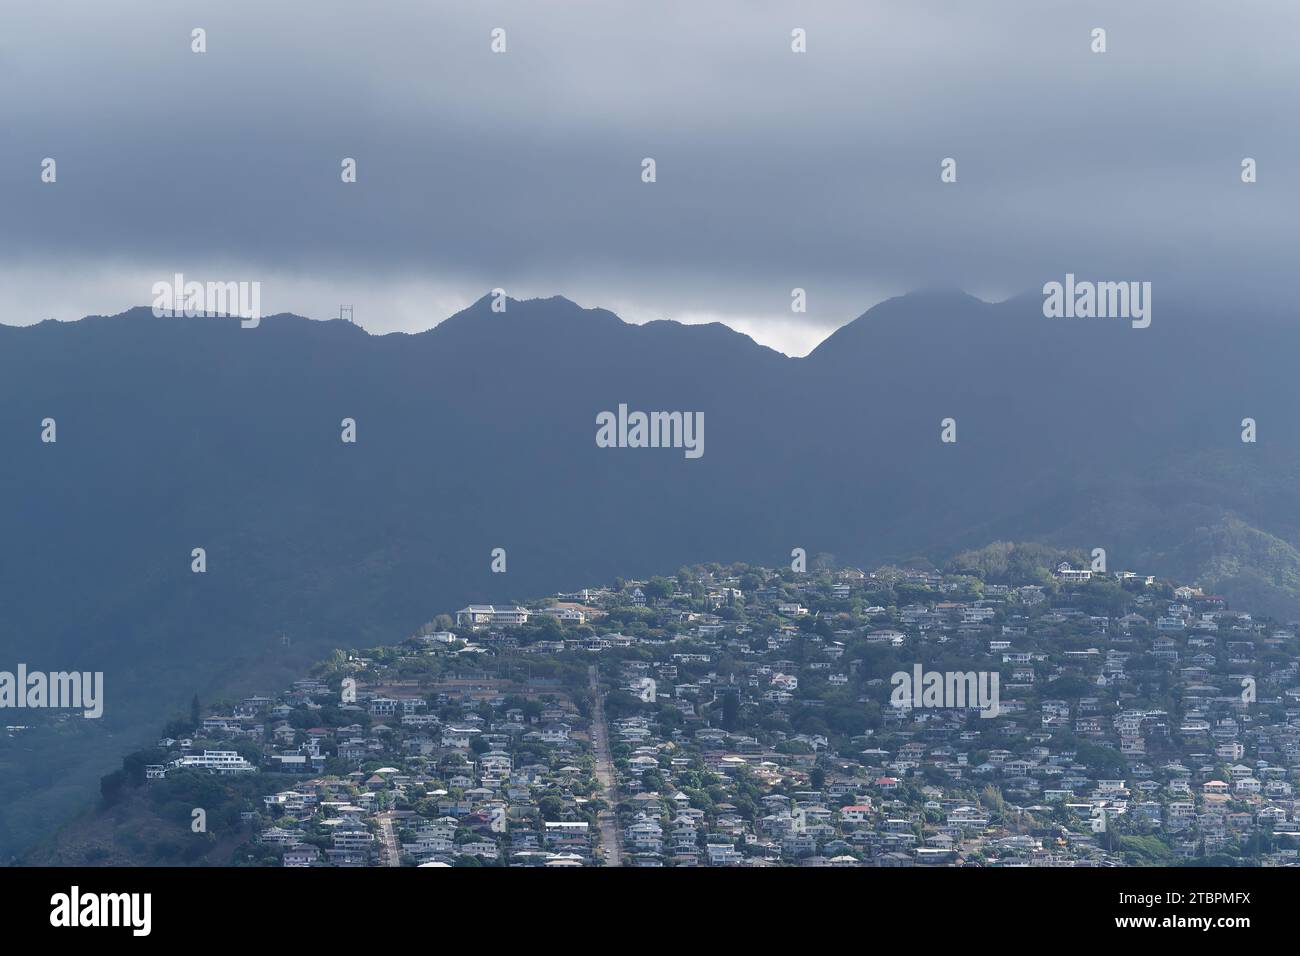 Aerial view of a picturesque small mountain village nestled in the foothills of the surrounding rugged mountainscape Stock Photo